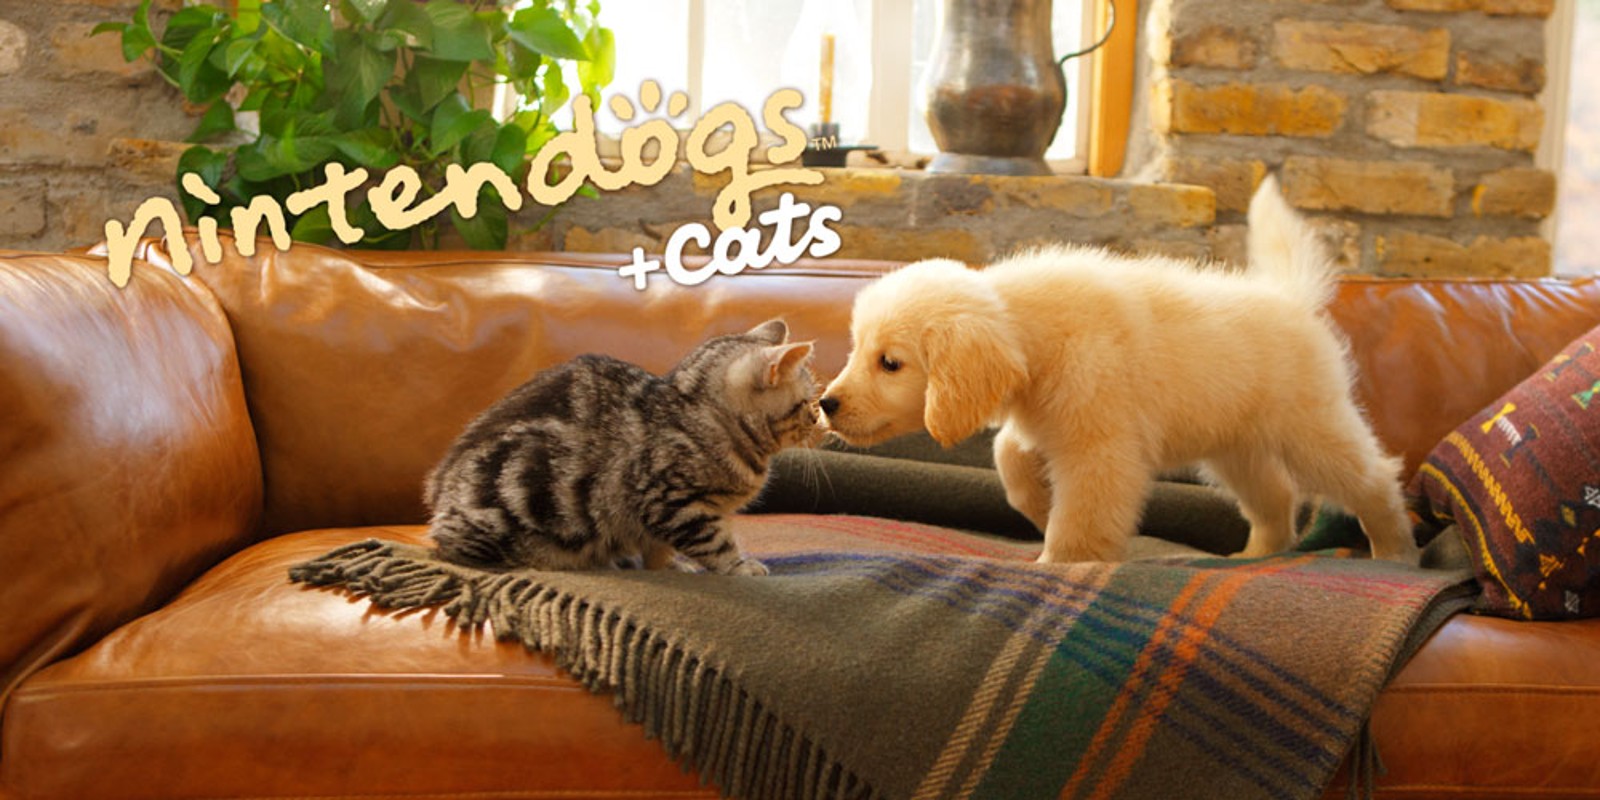 nintendogs + cats: Toy Poodle & New Friends